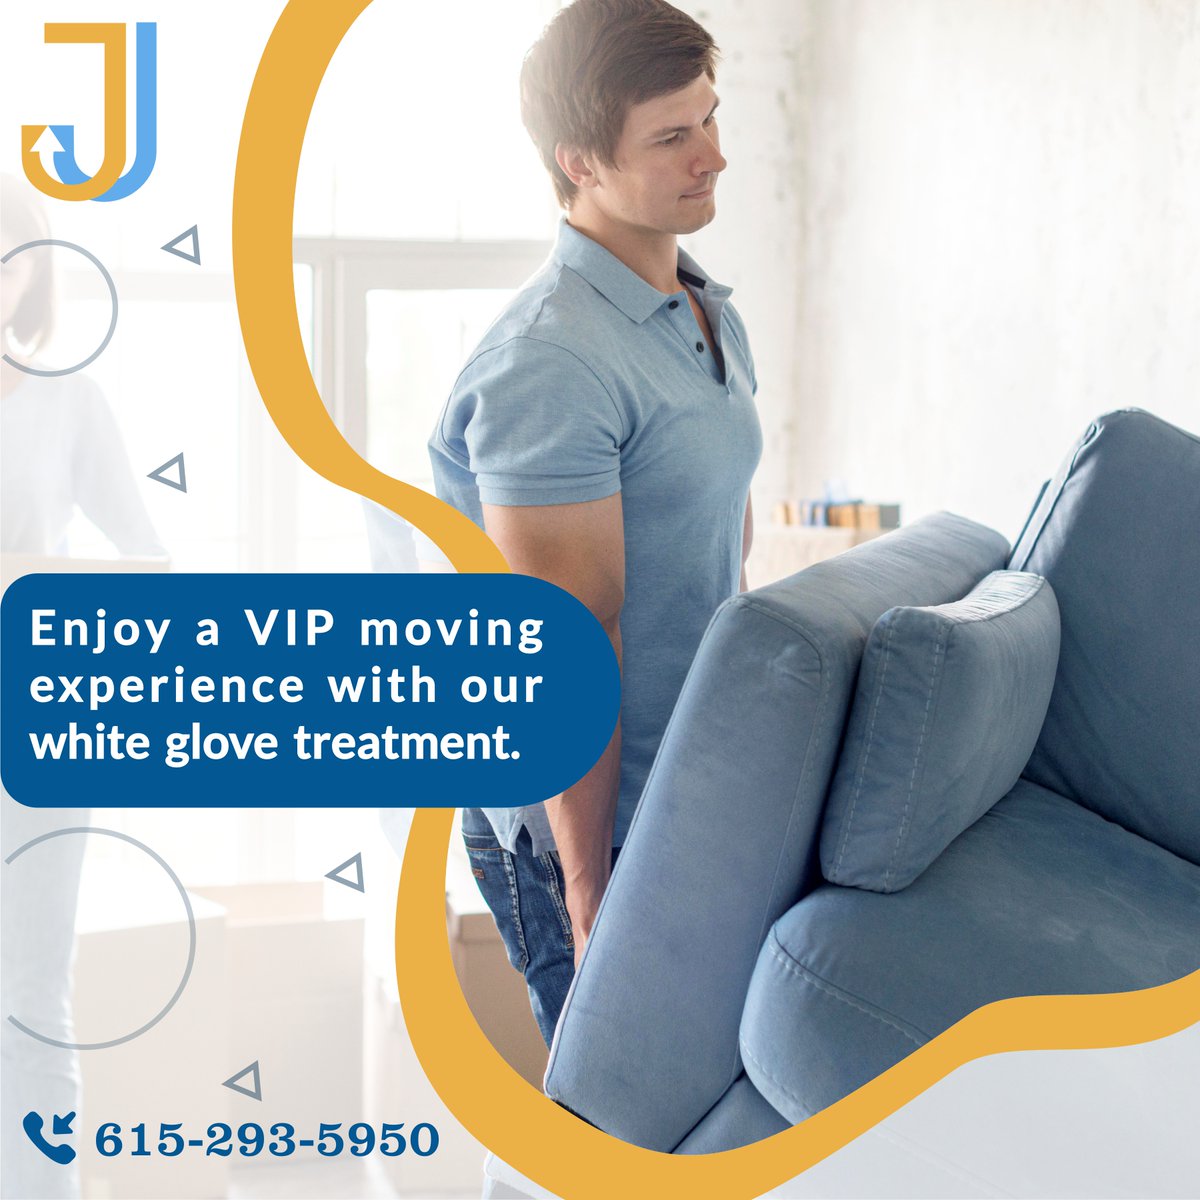 Sit back, relax, and let us handle everything with care and precision. 🛋️✨

Call Us On +1 615-293-5950

#JordanSolutions #WhiteGloveService #VIPMoving #StressFreeMove #ProfessionalMovers #MovingCompany #PremiumService #RelocationExperts